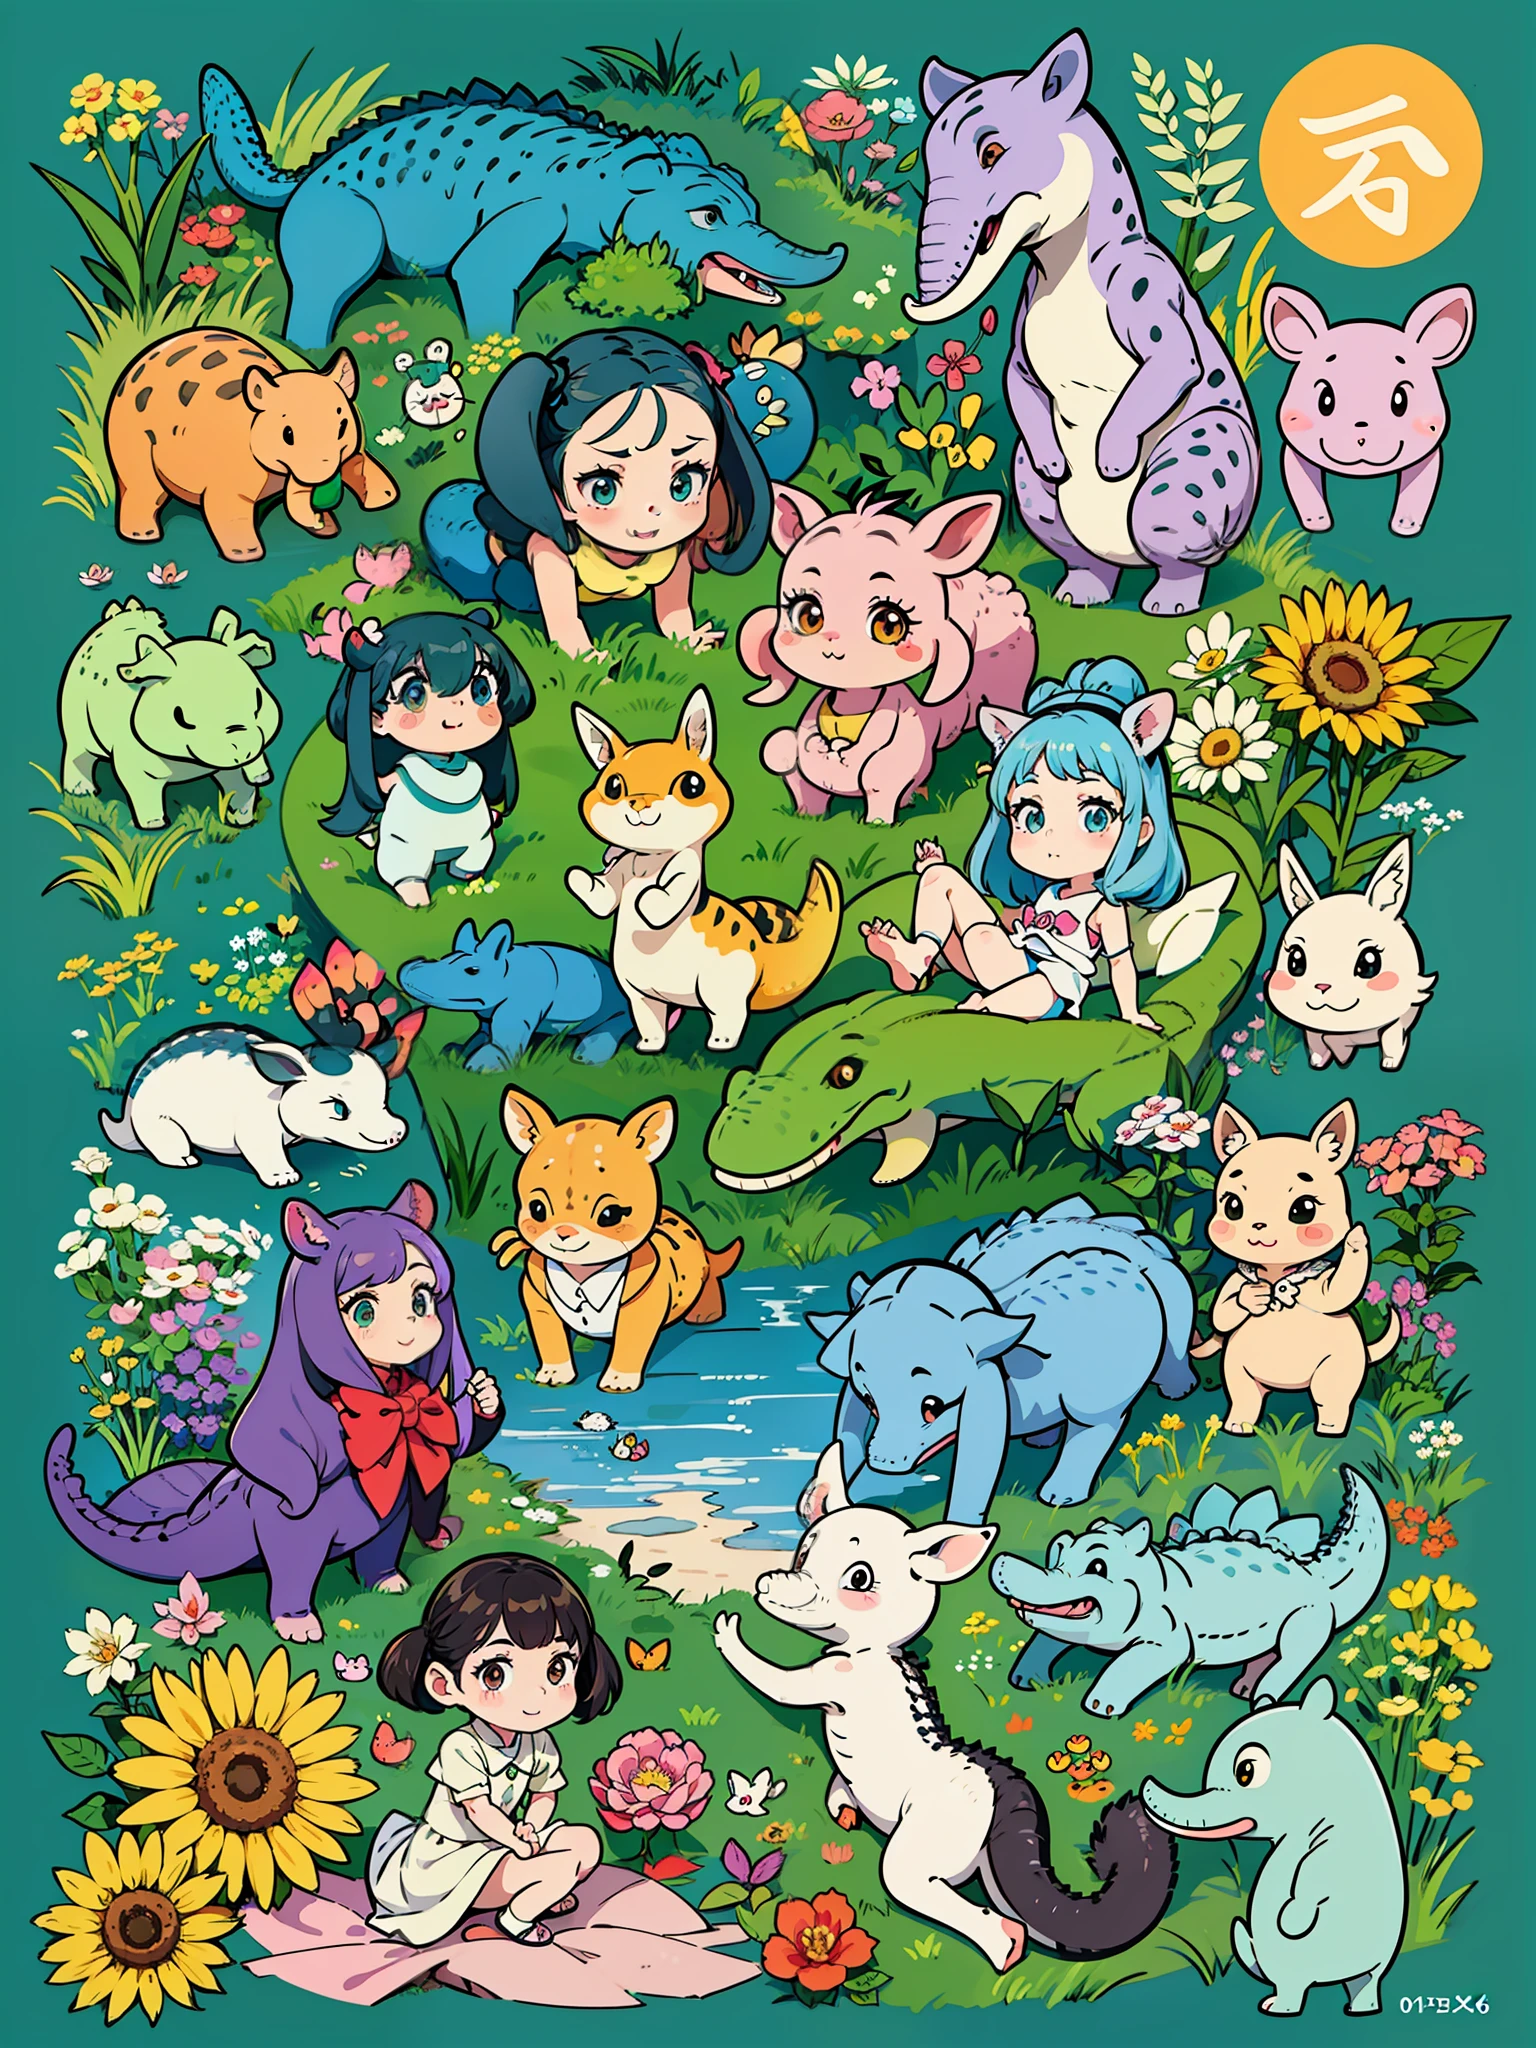 There are many different cute cartoon animals, elephants, crocodiles, rabbits and other animal patterns in this photo, cute, hand drawn illustrations, colorful, Wang Chen, crocodile Loki, art cover, ƒ5.6,🦩🪐🐞👩🏻🦳; 🌞🌄 , code, 🪔 🎨 metaverse